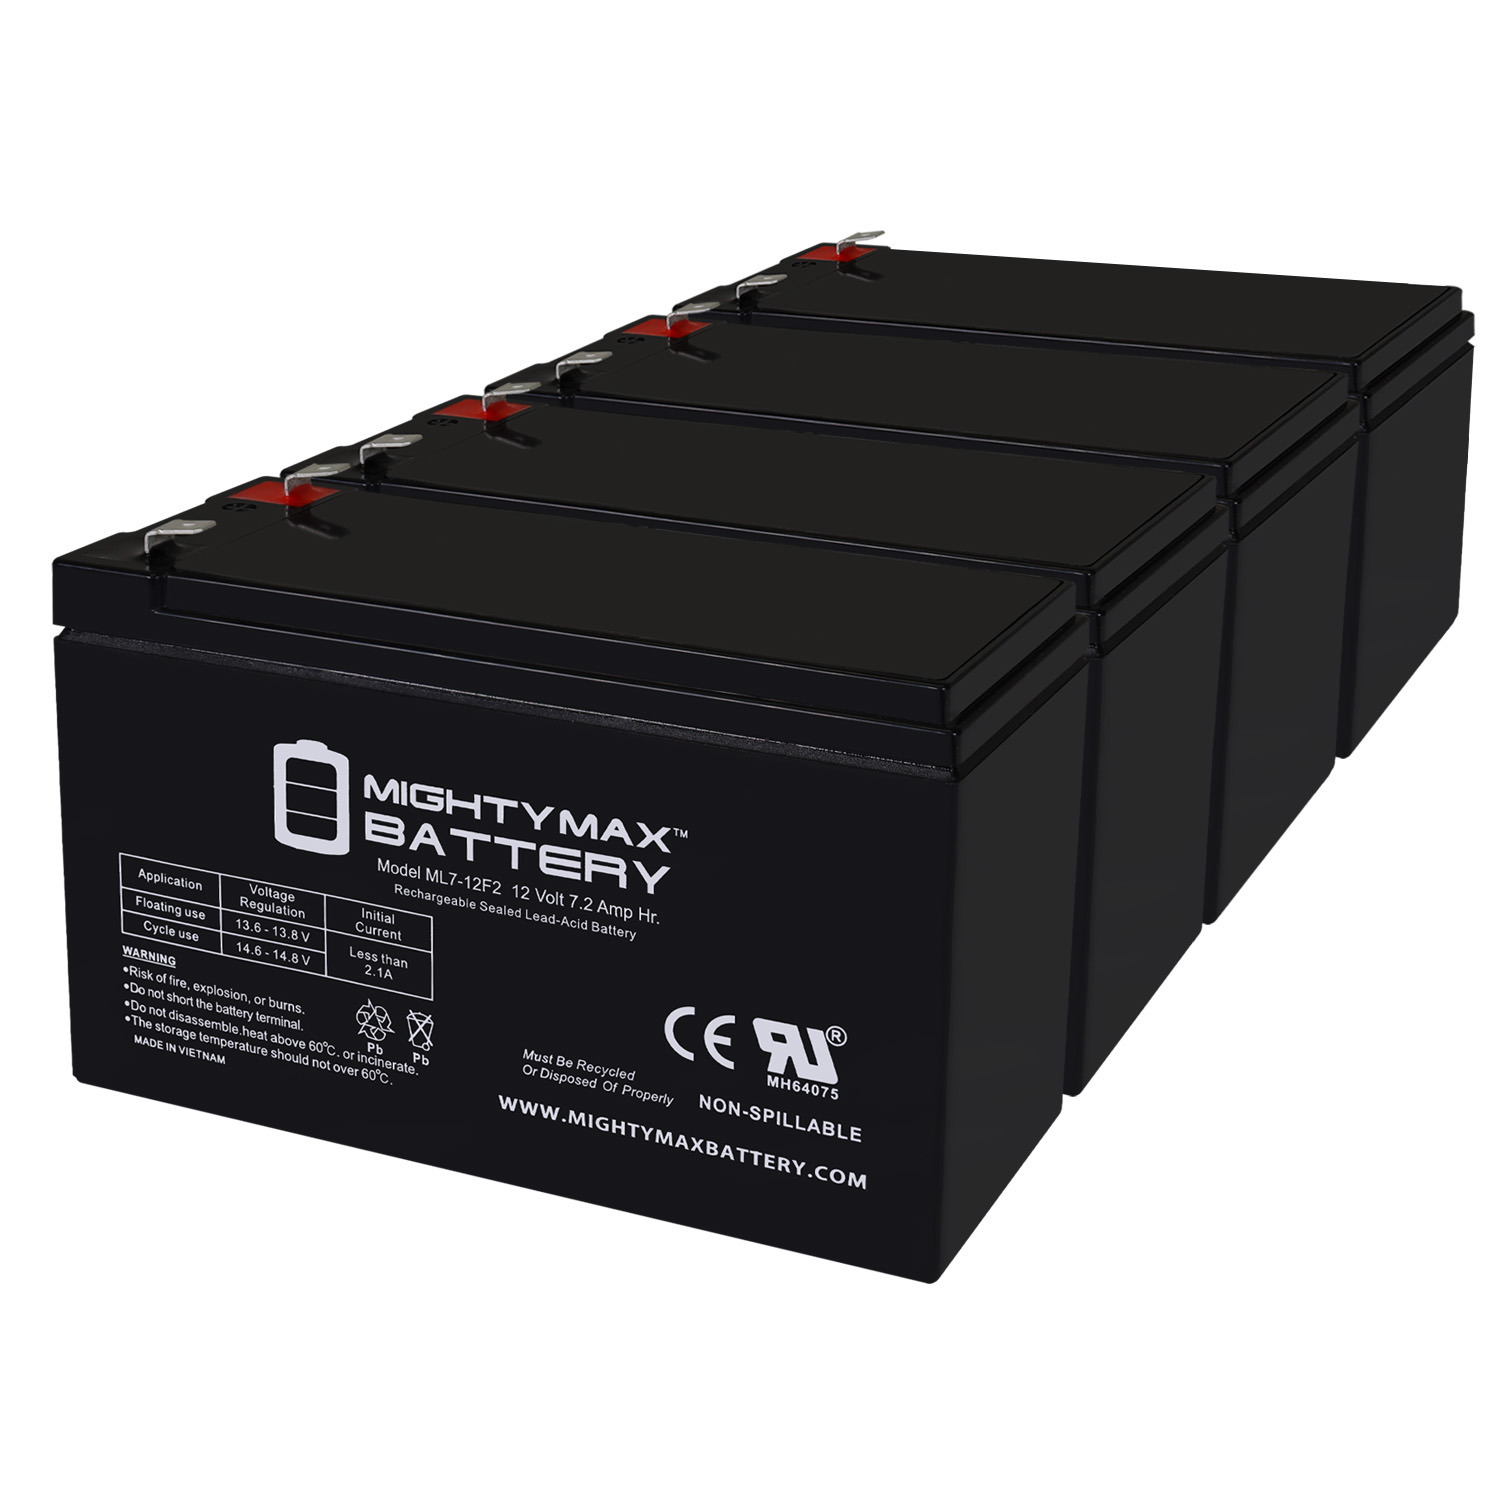 12V 7Ah F2 Replacement Battery for Minuteman BP144V13 - 4 Pack